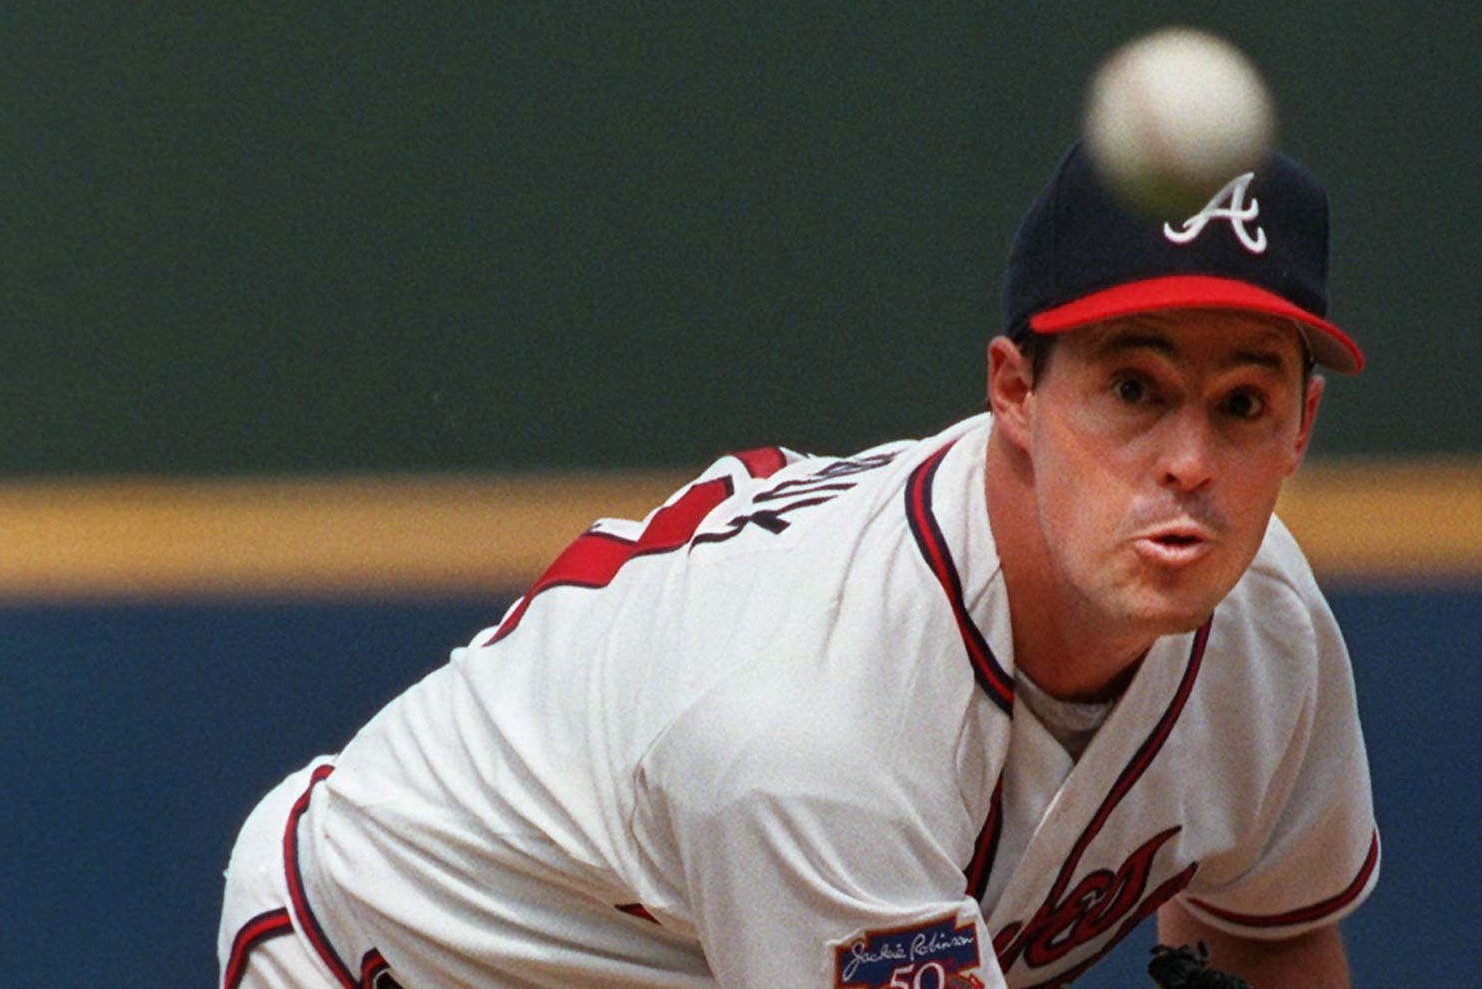 Greg Maddux 'Complete Control' Autographed Limited Edition of 11